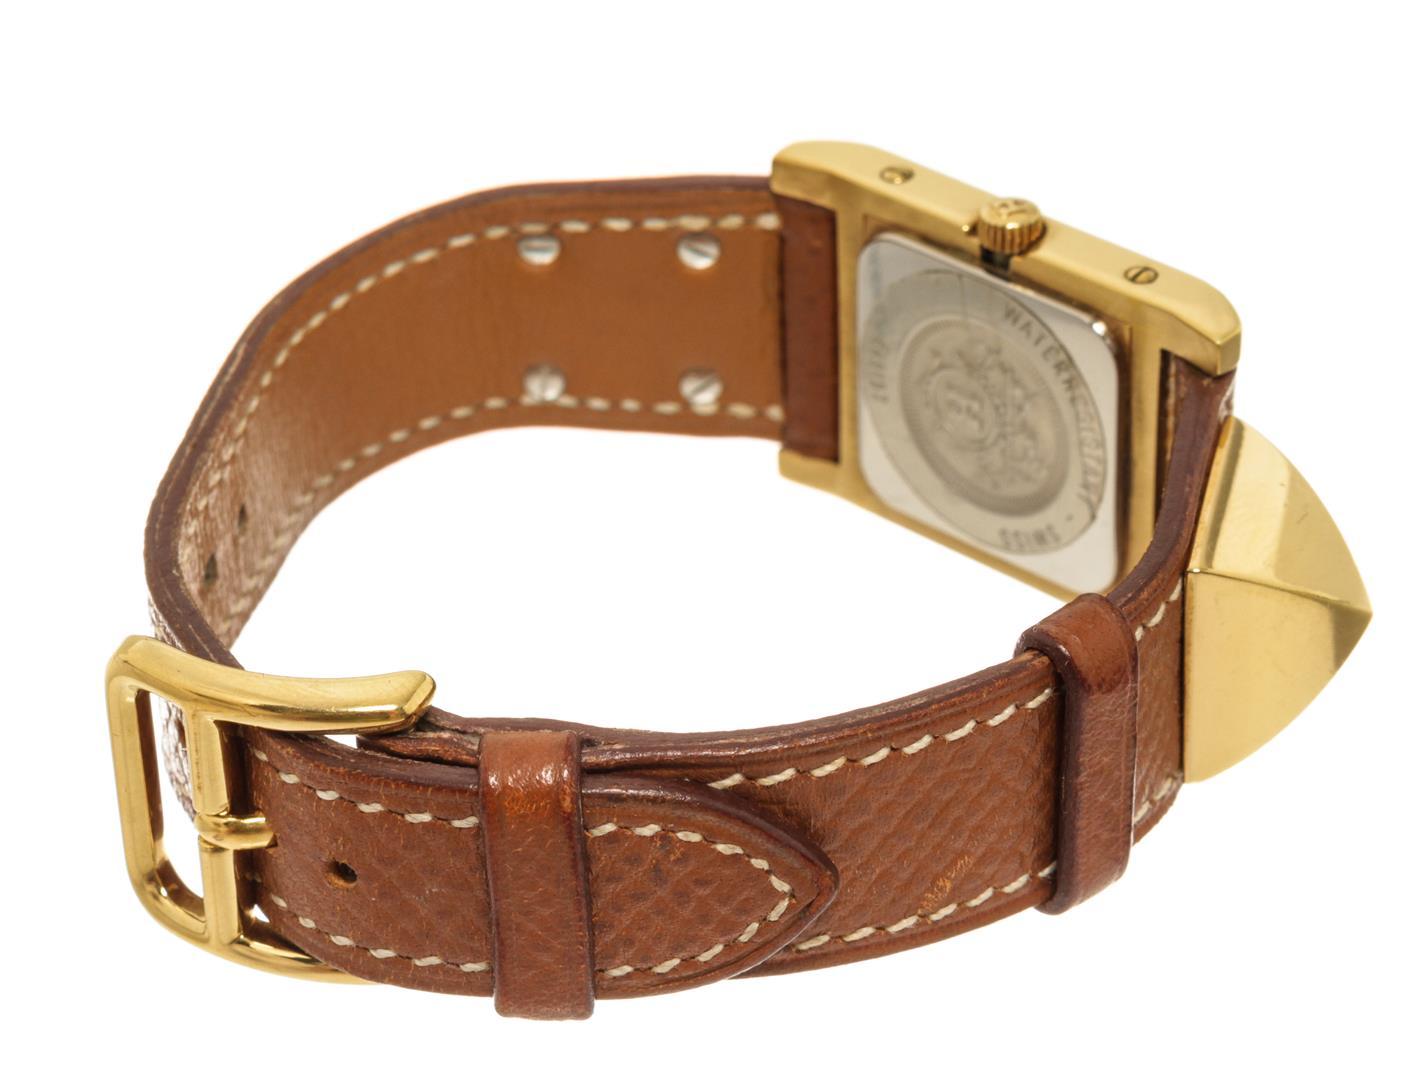 Hermes Brown Metal and Leather Medor Plated 23 Quartz Watch